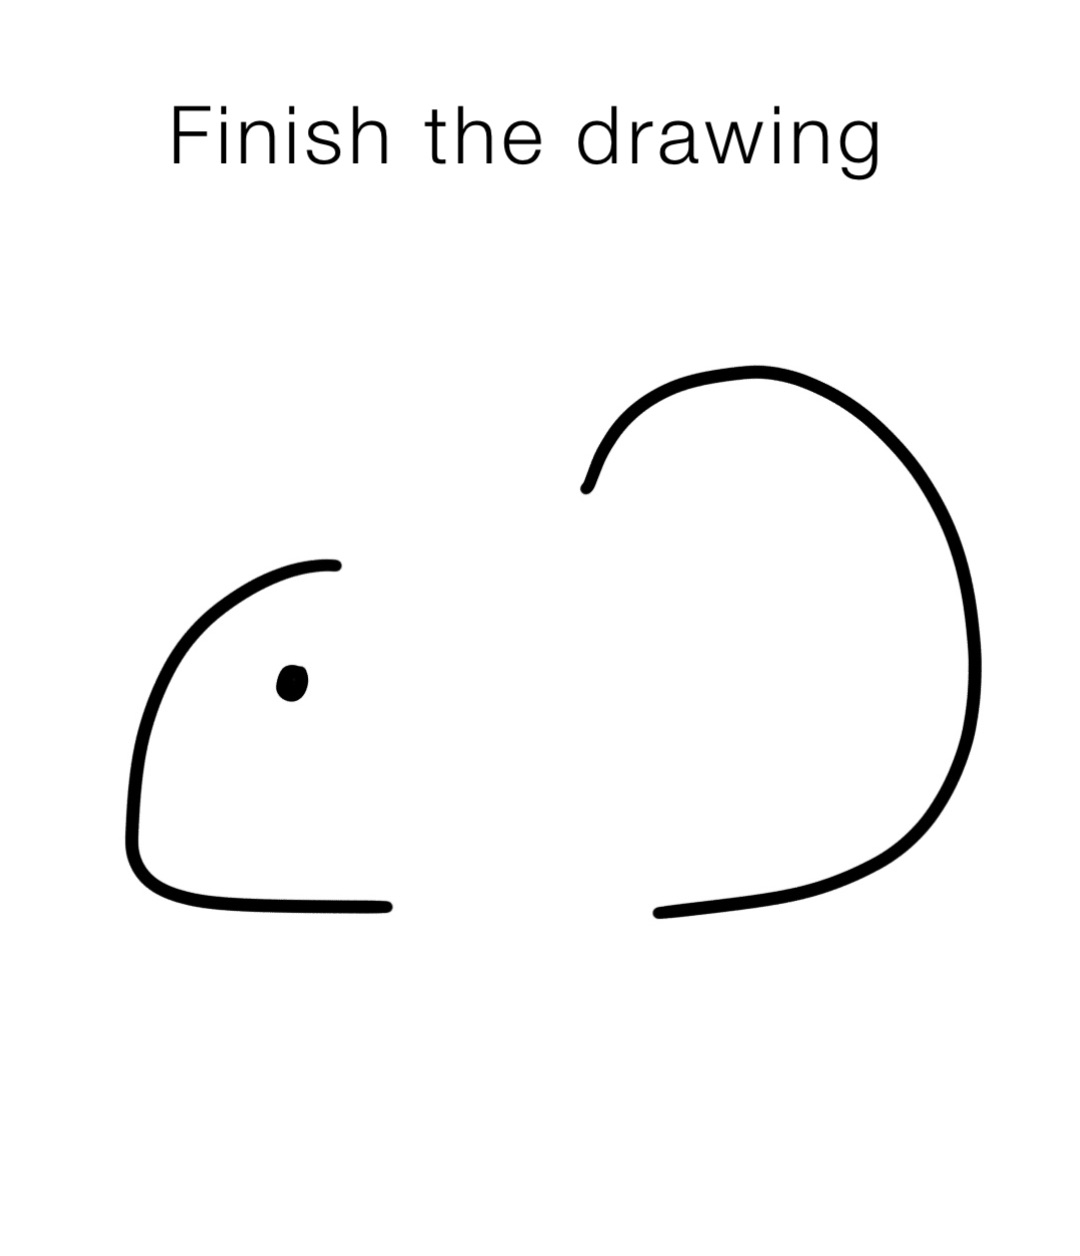 Finish the drawing